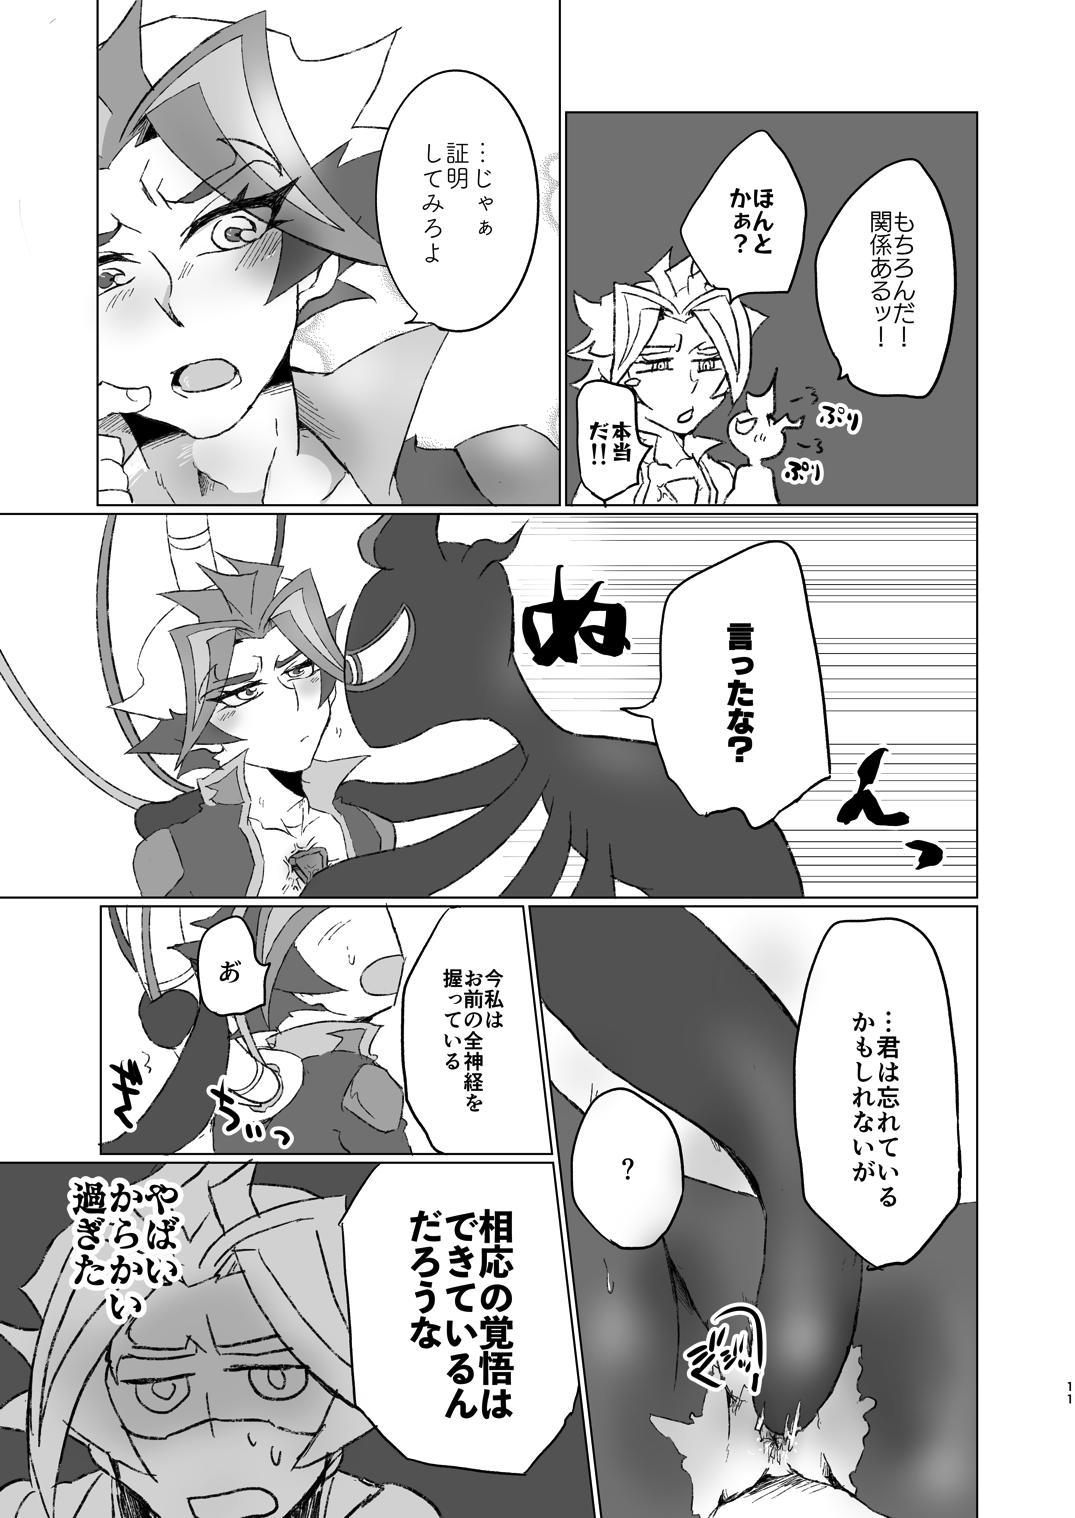 Nice Ass A little bit further - Yu-gi-oh vrains Speculum - Page 10